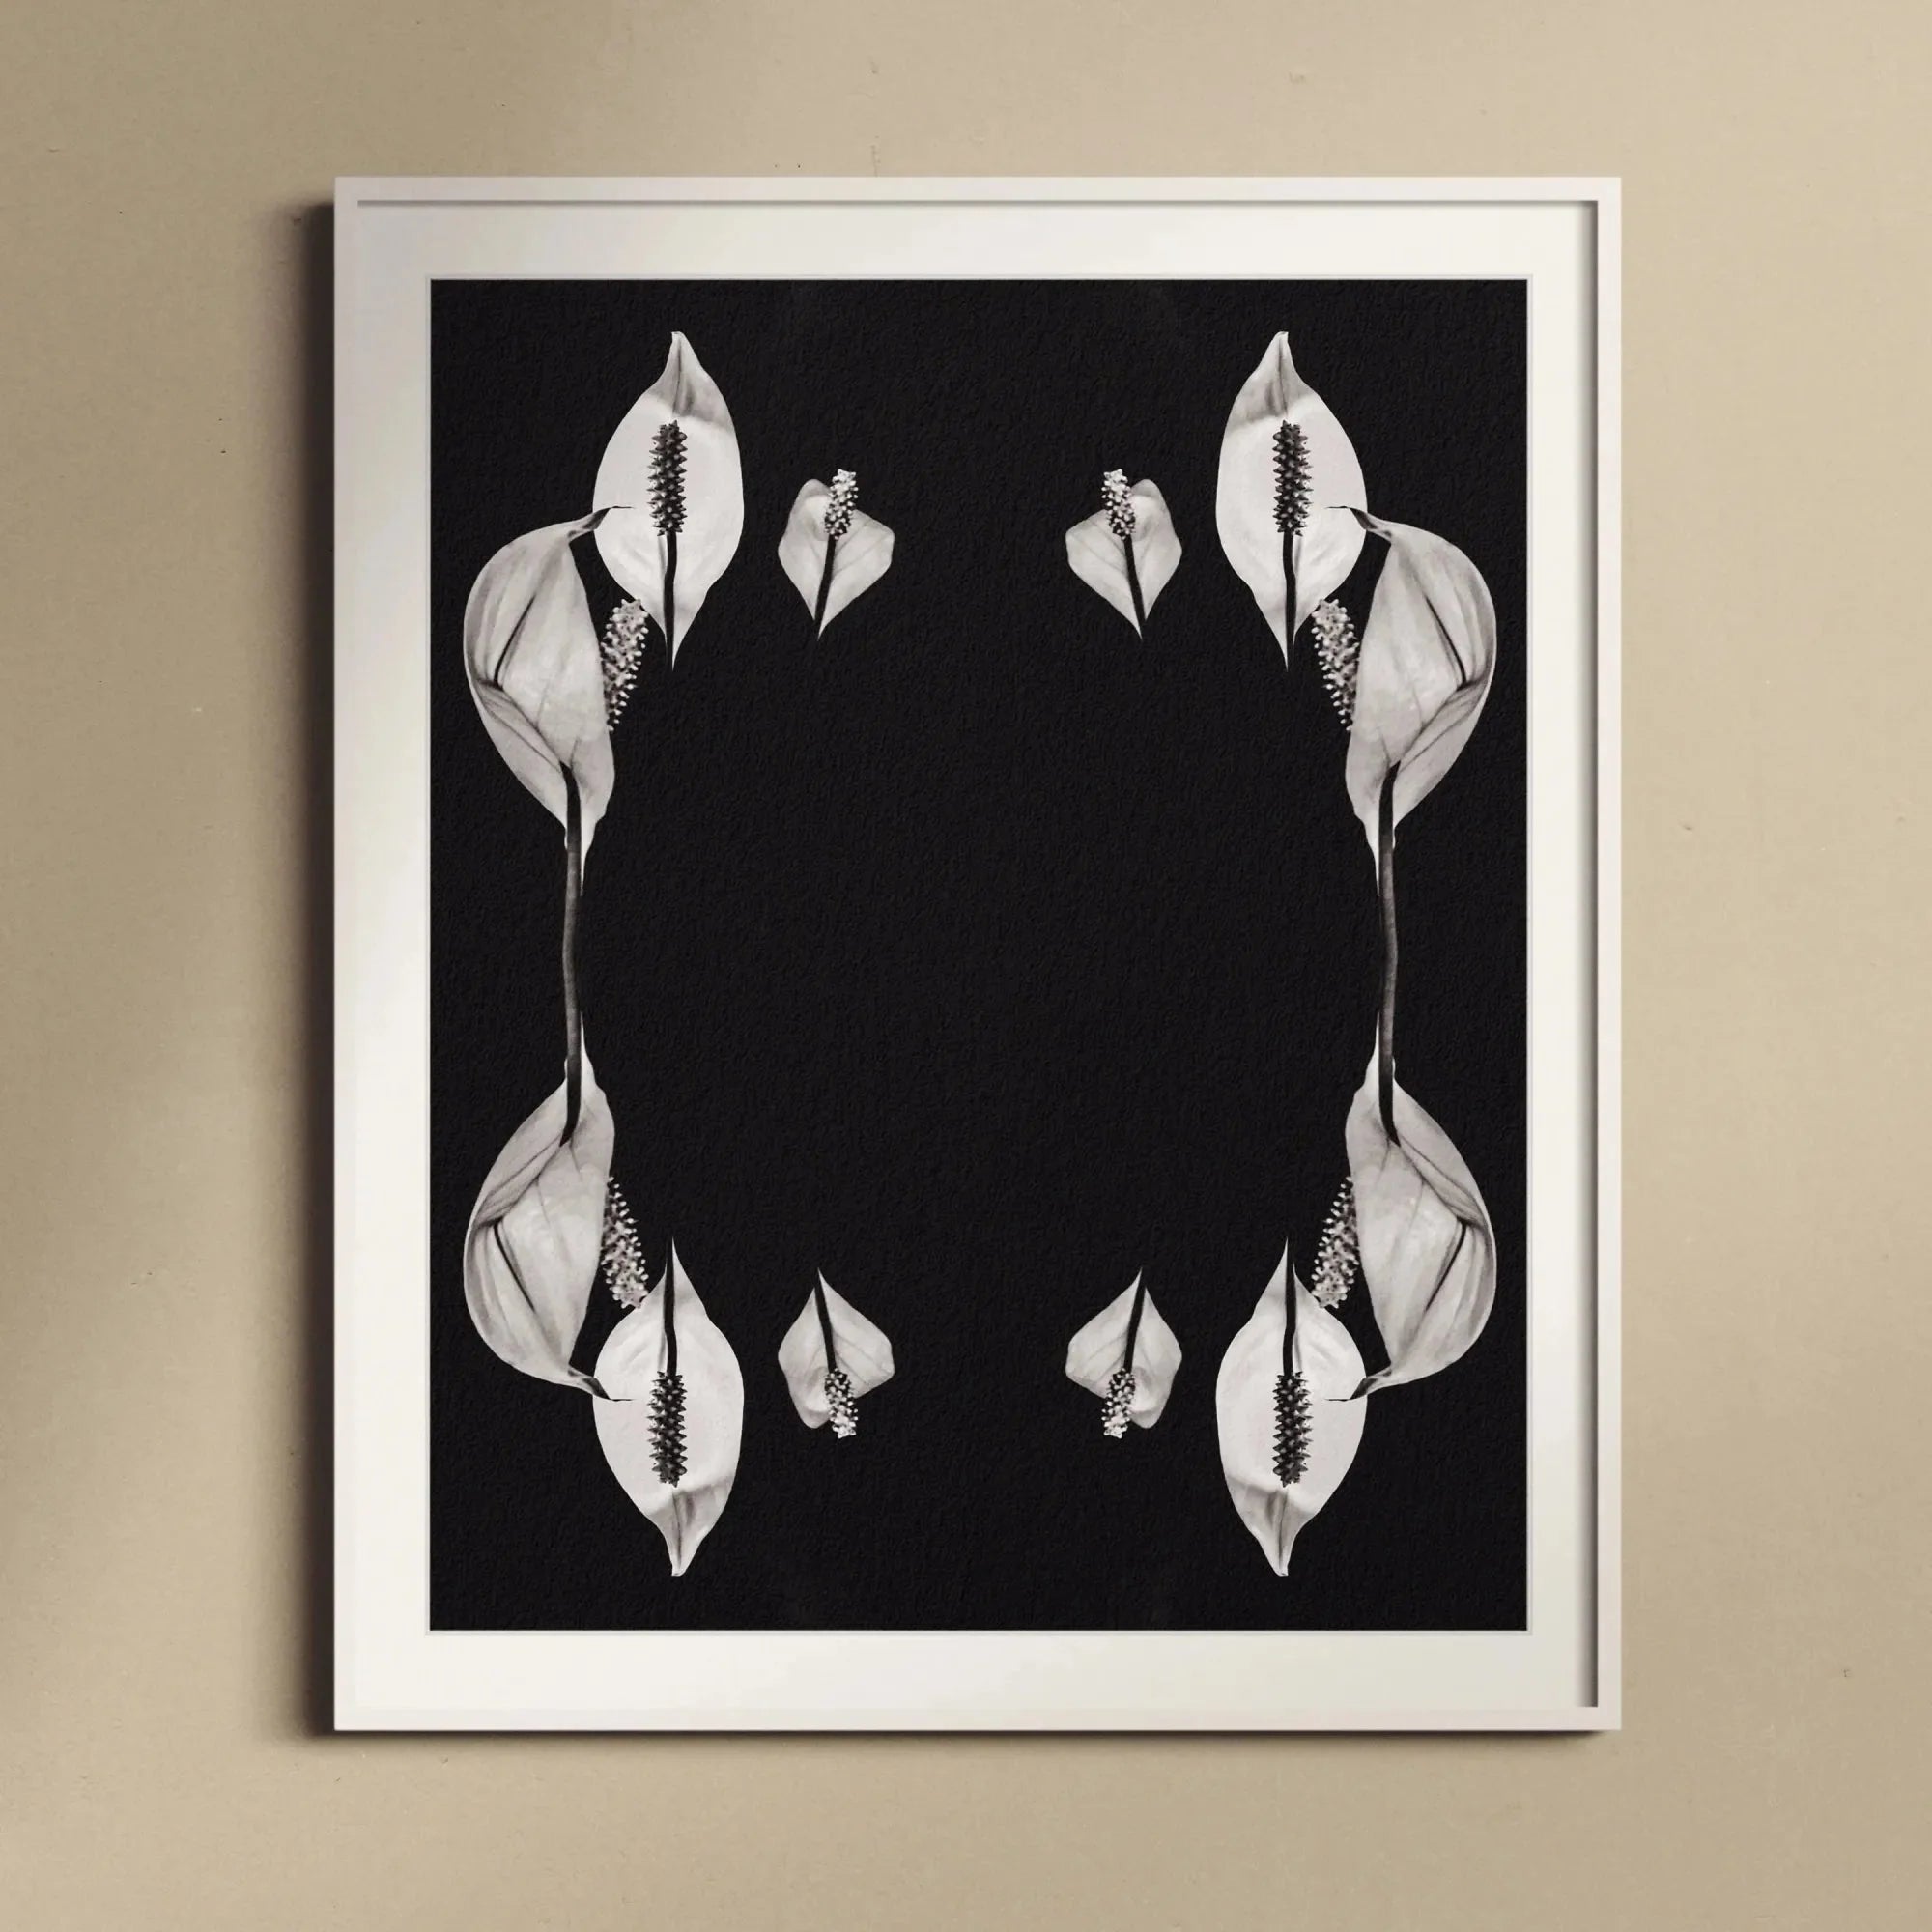 Pearly Whites Framed & Mounted Print - Posters Prints & Visual Artwork - Aesthetic Art